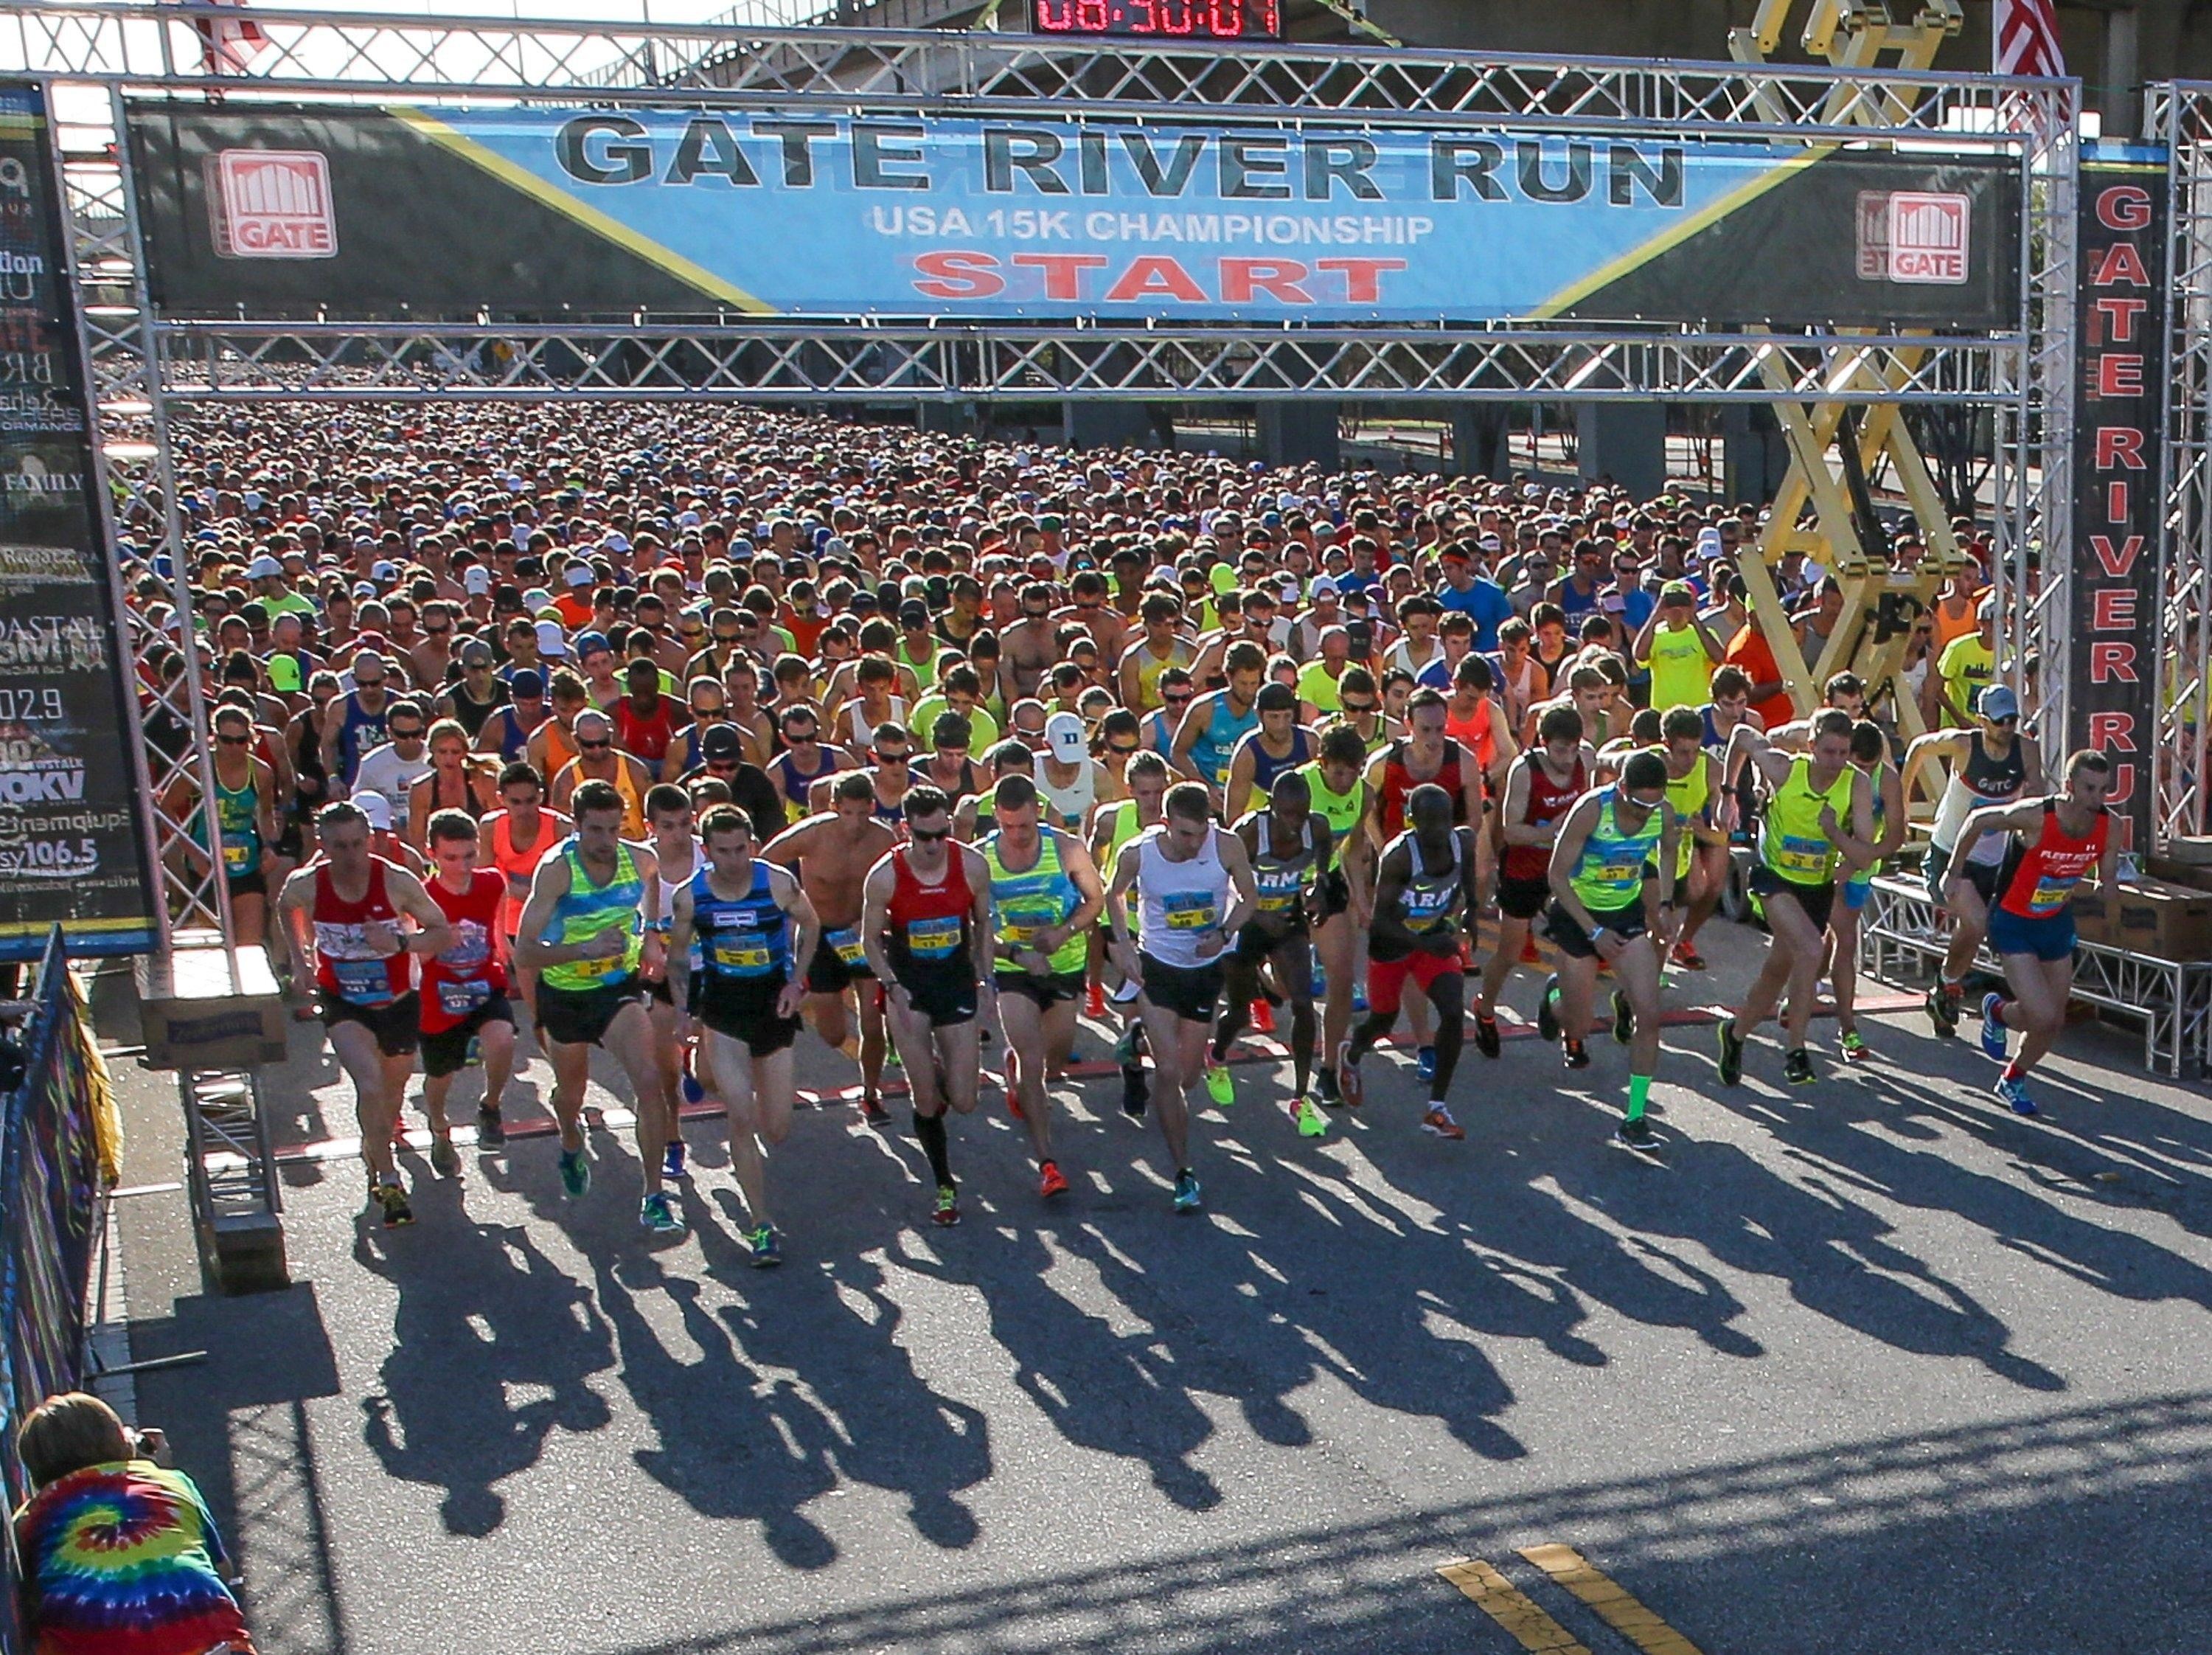 There is a group of 33 runners called the Streakers who have finished every Gate River Run